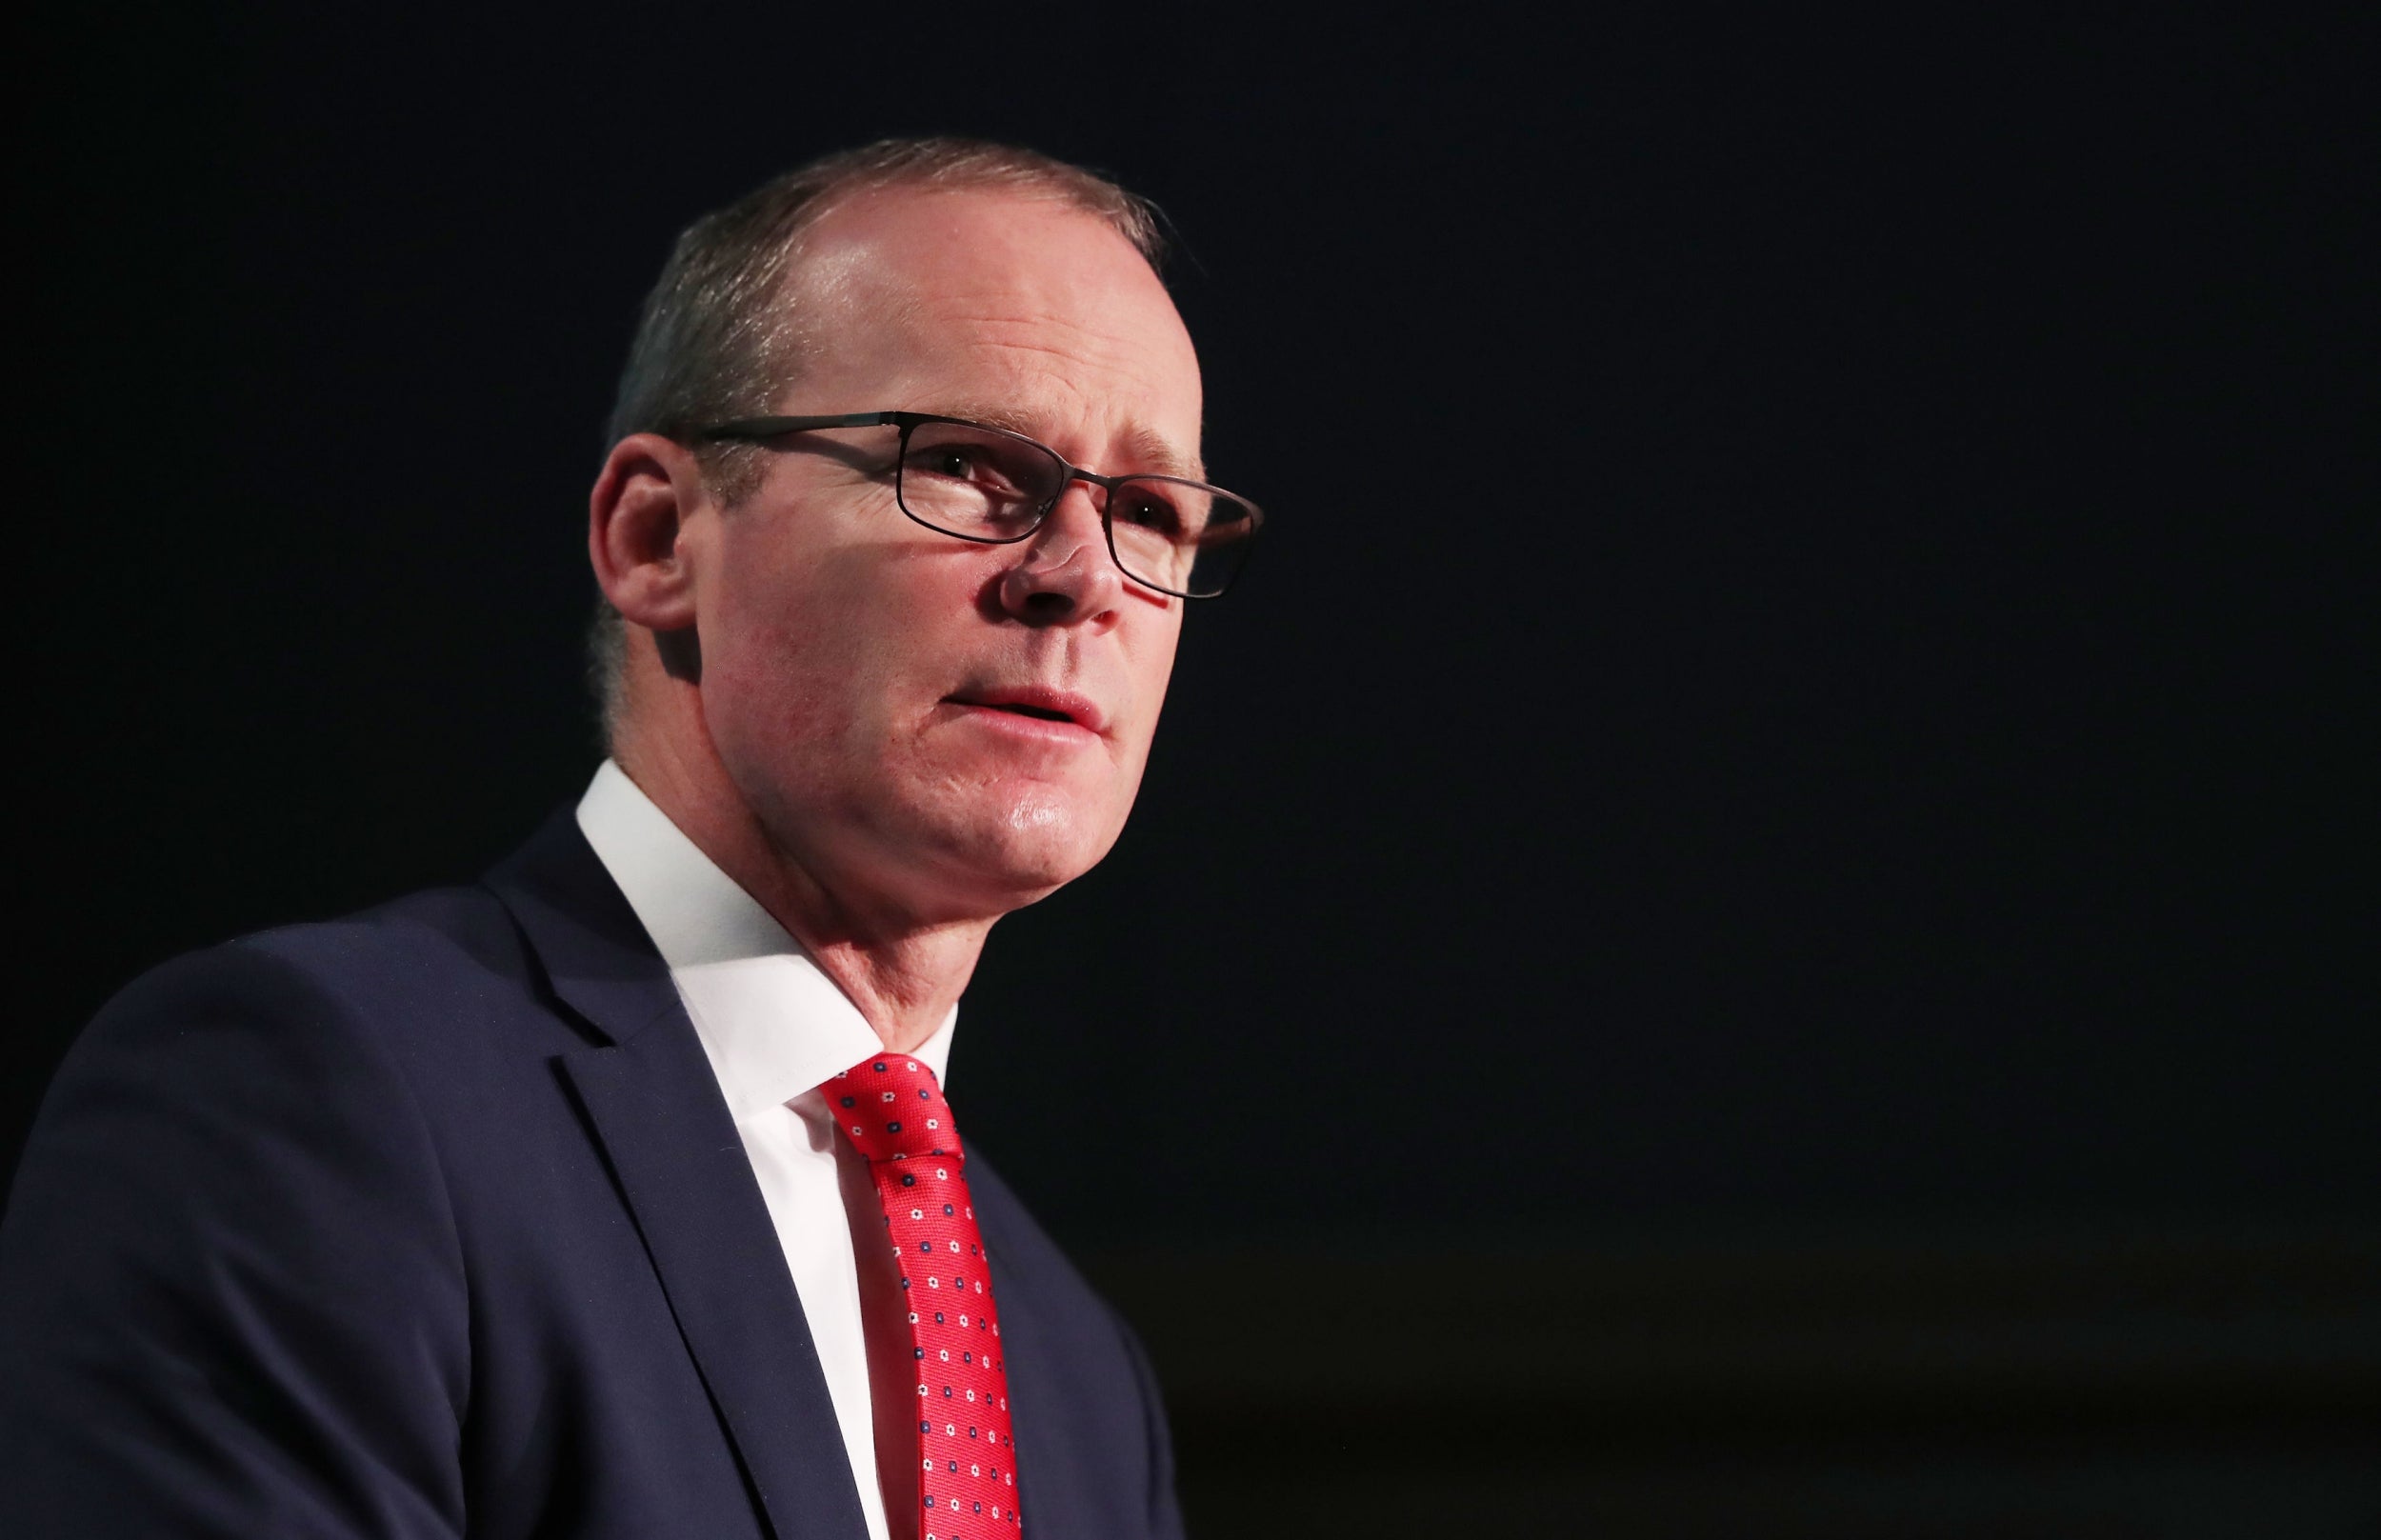 Ireland’s deputy prime minister and foreign minister Simon Coveney was caught on tape making unguarded comments about the possibility of a border